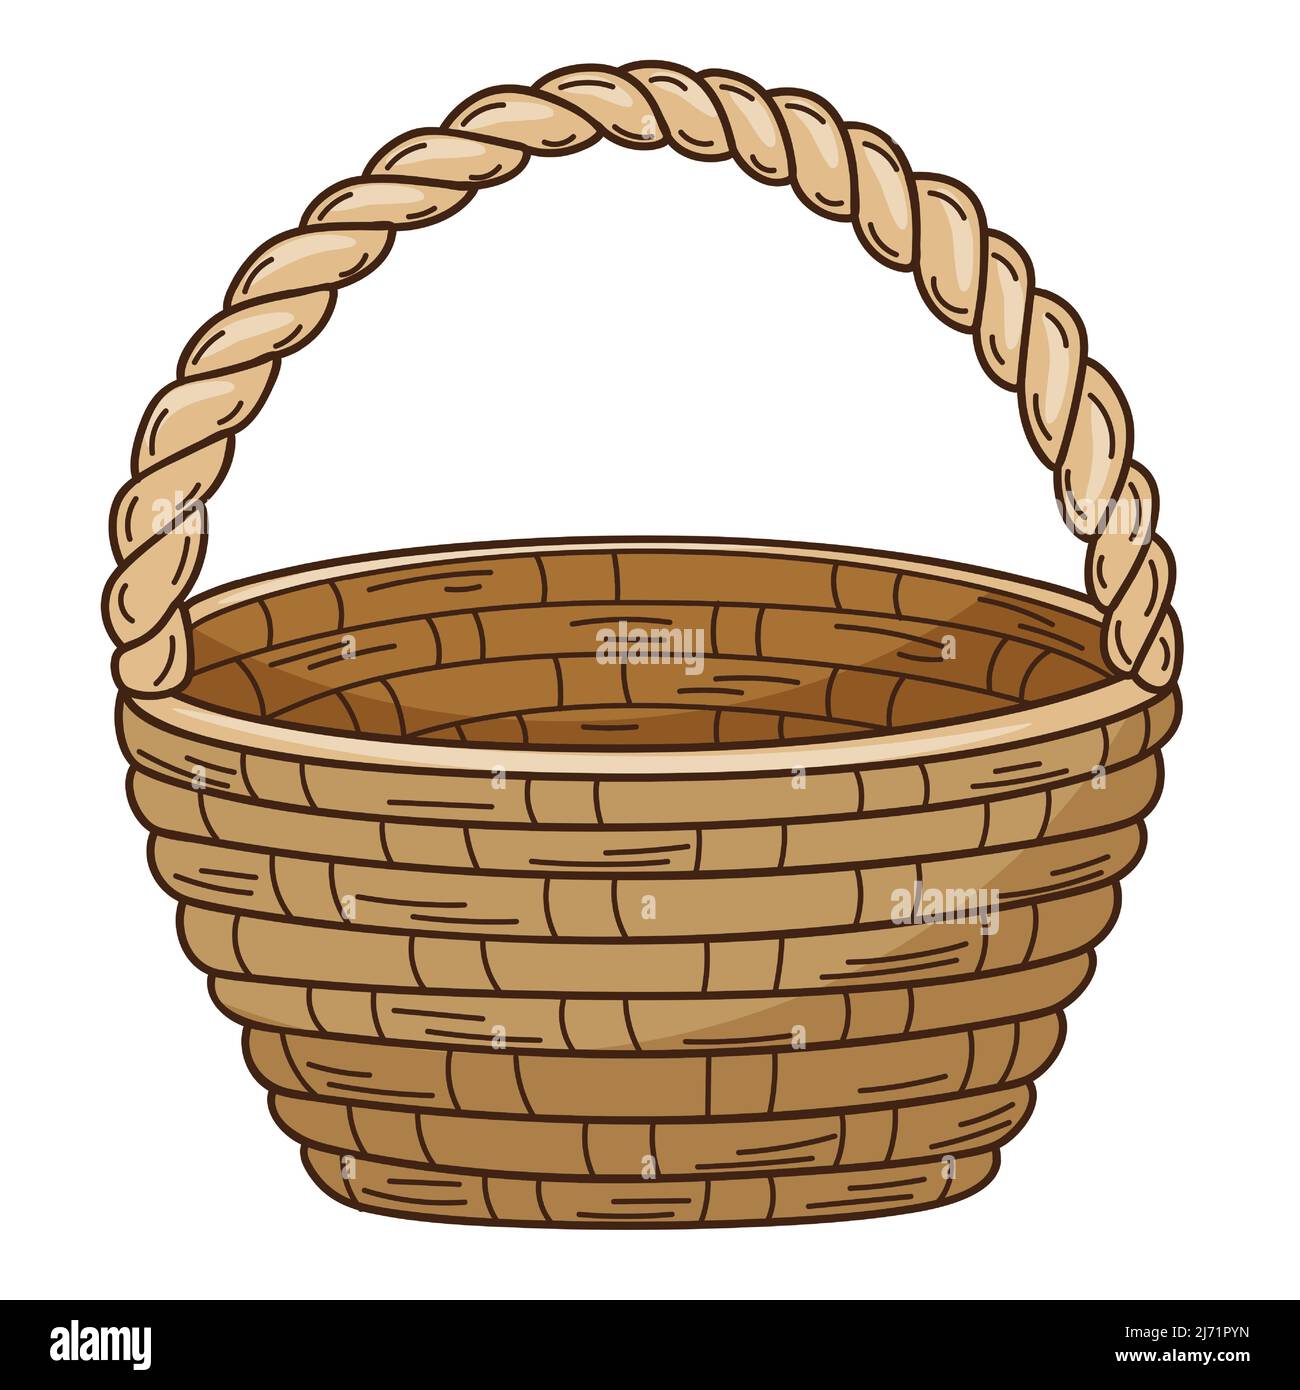 An empty wicker basket. Decorative element with an outline. Doodle, hand-drawn. Flat design. Color vector illustration. Isolated on a white background Stock Vector